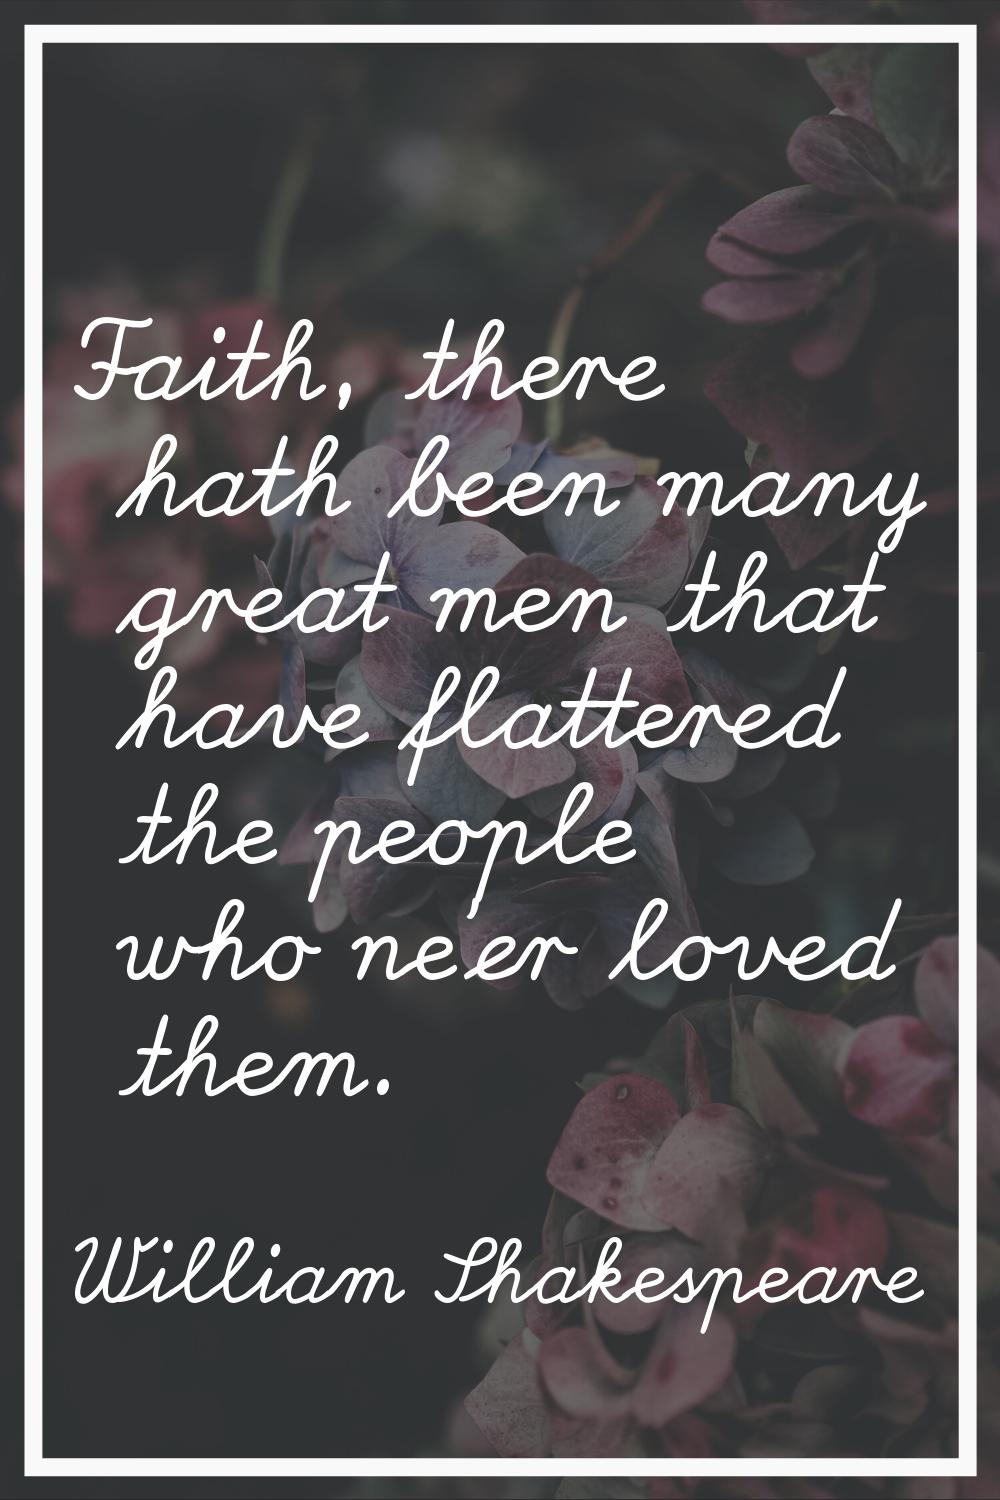 Faith, there hath been many great men that have flattered the people who ne'er loved them.